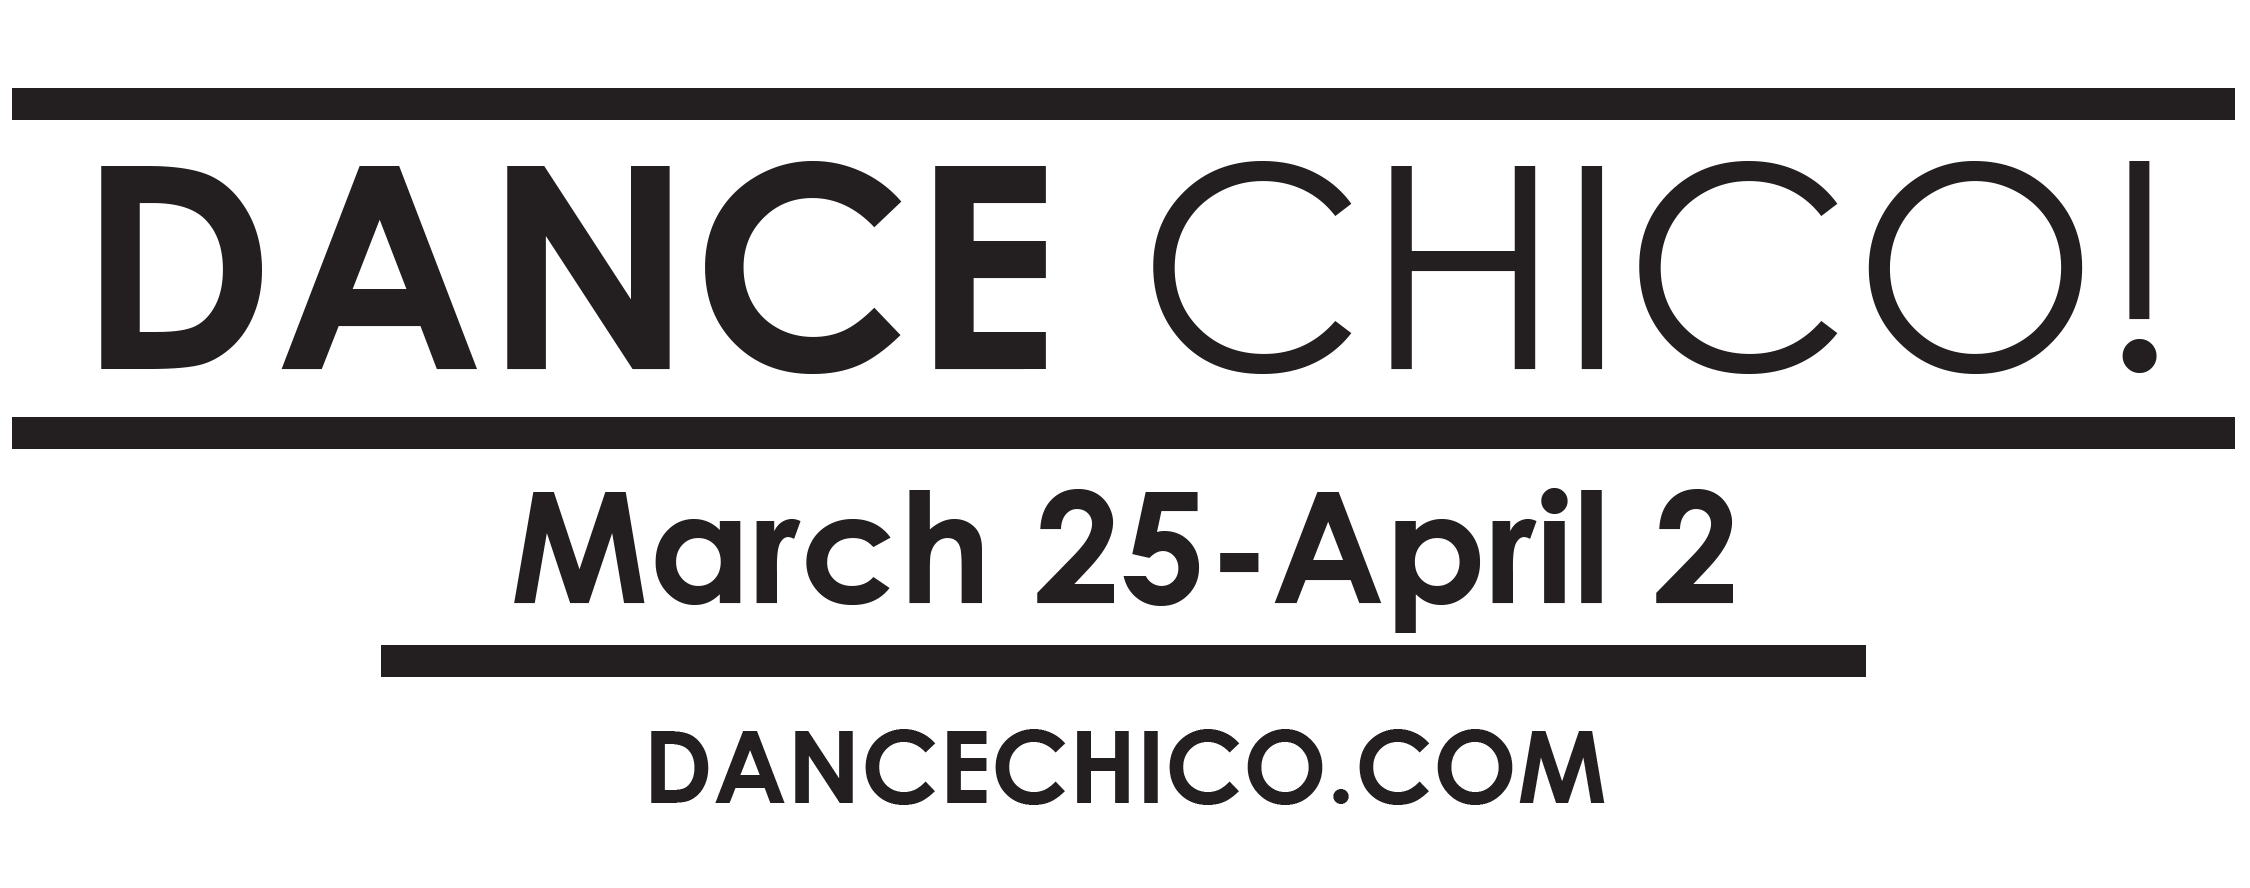 Dance-Chico-16-17--logo-1.png